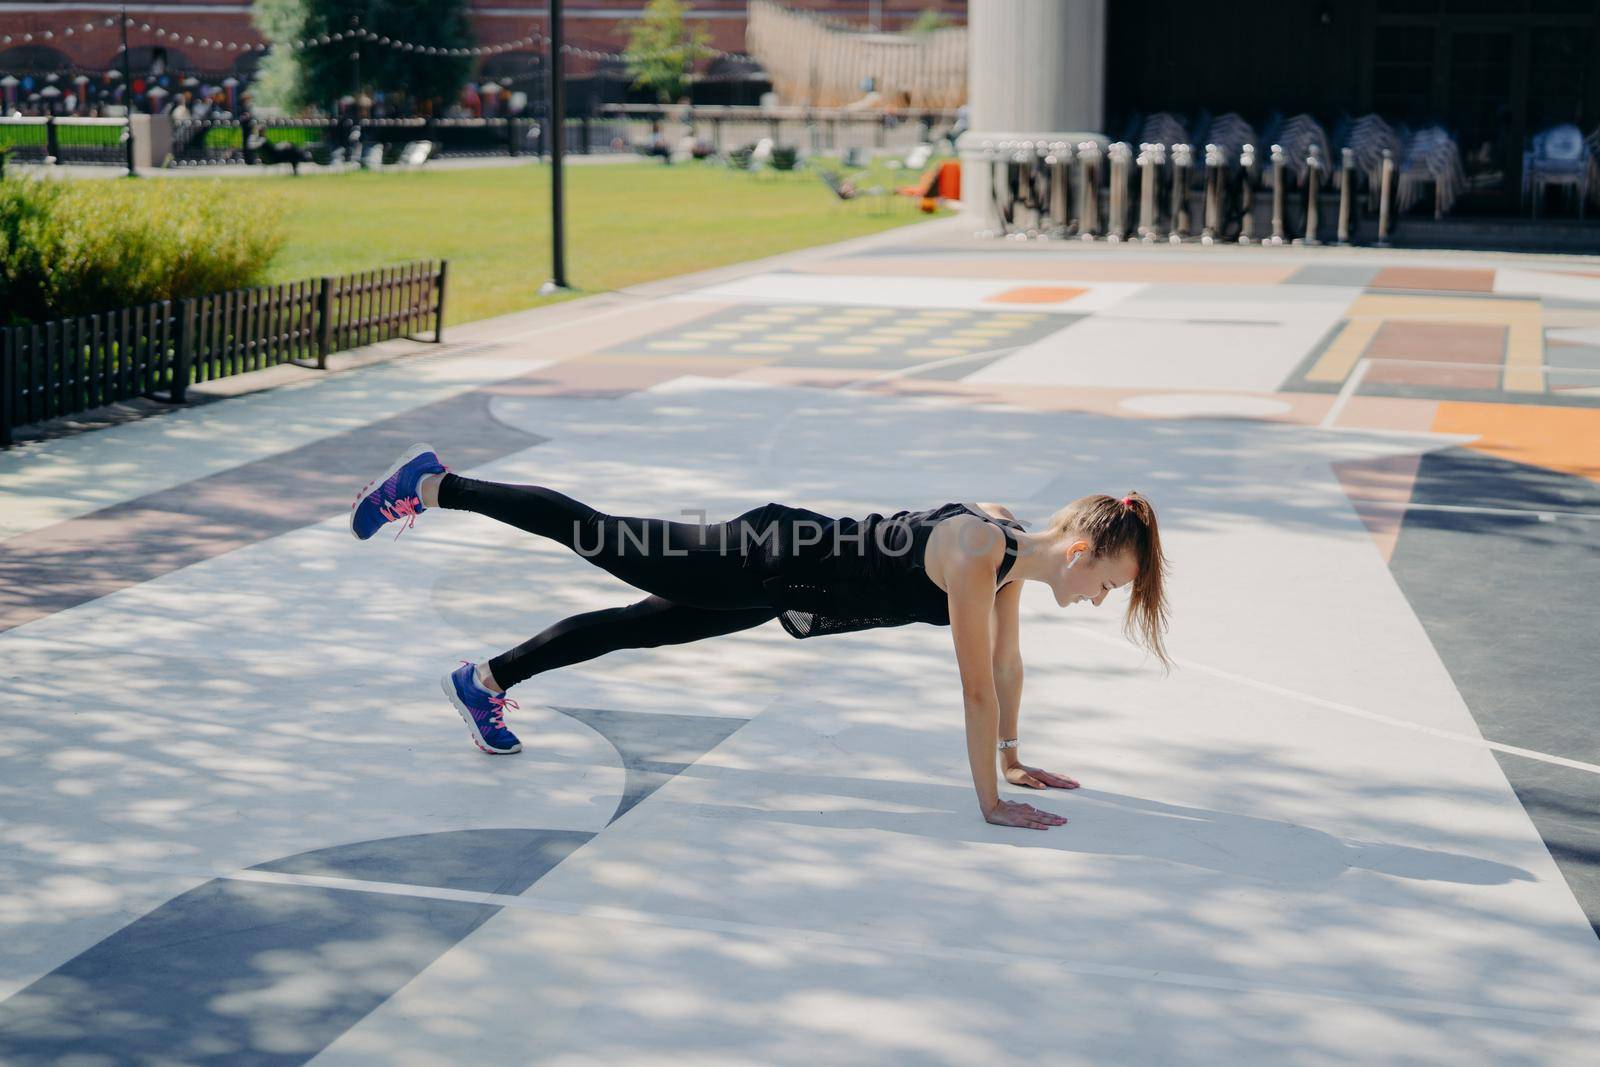 Sporty slim young woman does planking exercise raises leg demonstrates her determination wears sportsclothes and sneakers trains outdoors listens music in earphones. Healthy lifestyle concept by vkstock